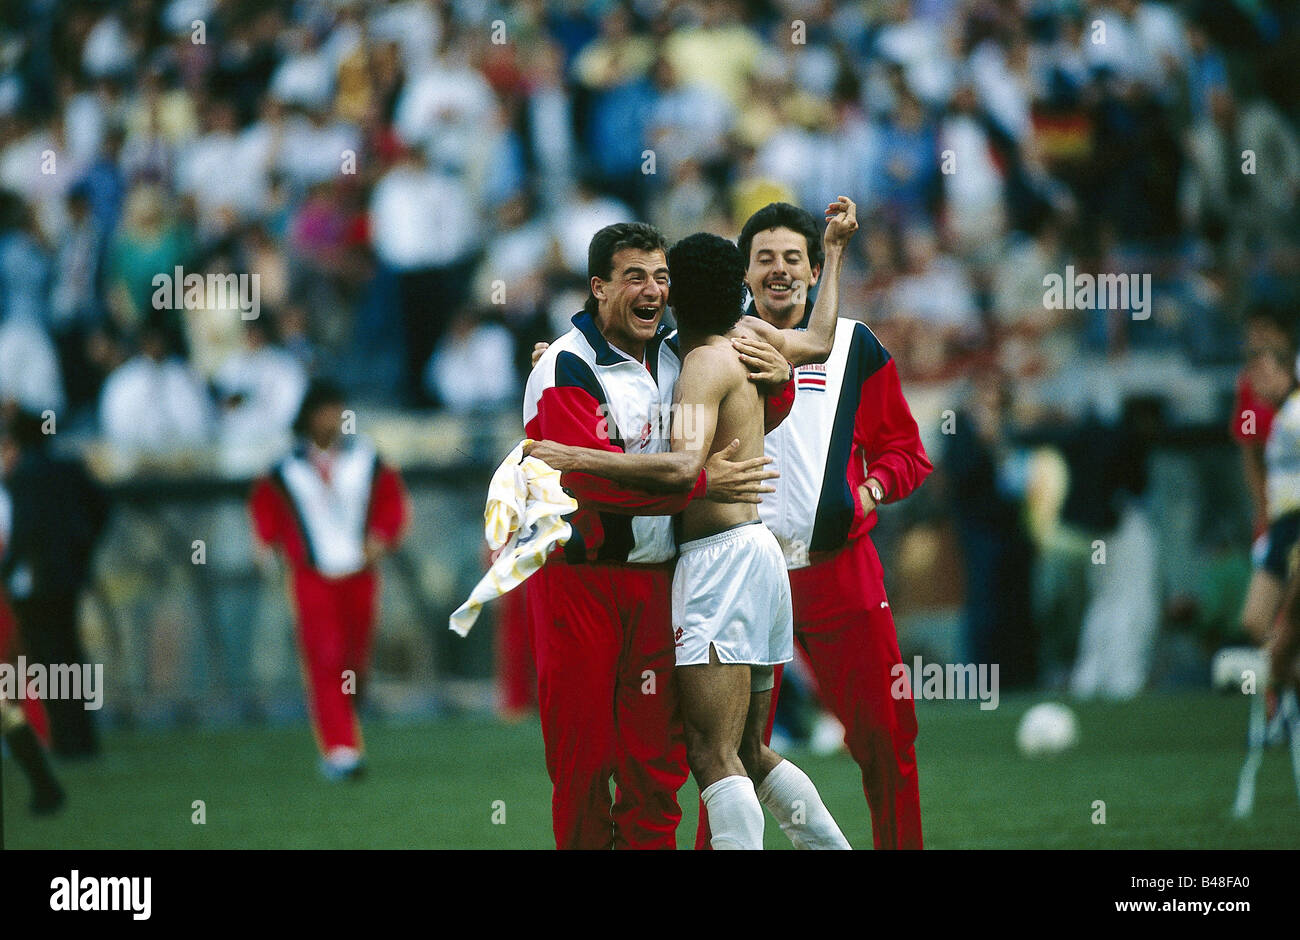 Sport / Sports, soccer, football, World Cup 1990, final round, group match, Costa Rica against Scotland, (1:0) in Genoa, Italy, 11.6.1990, team of Costa Rica, match, historic, historical, 20th century, people, 1990s, Stock Photo